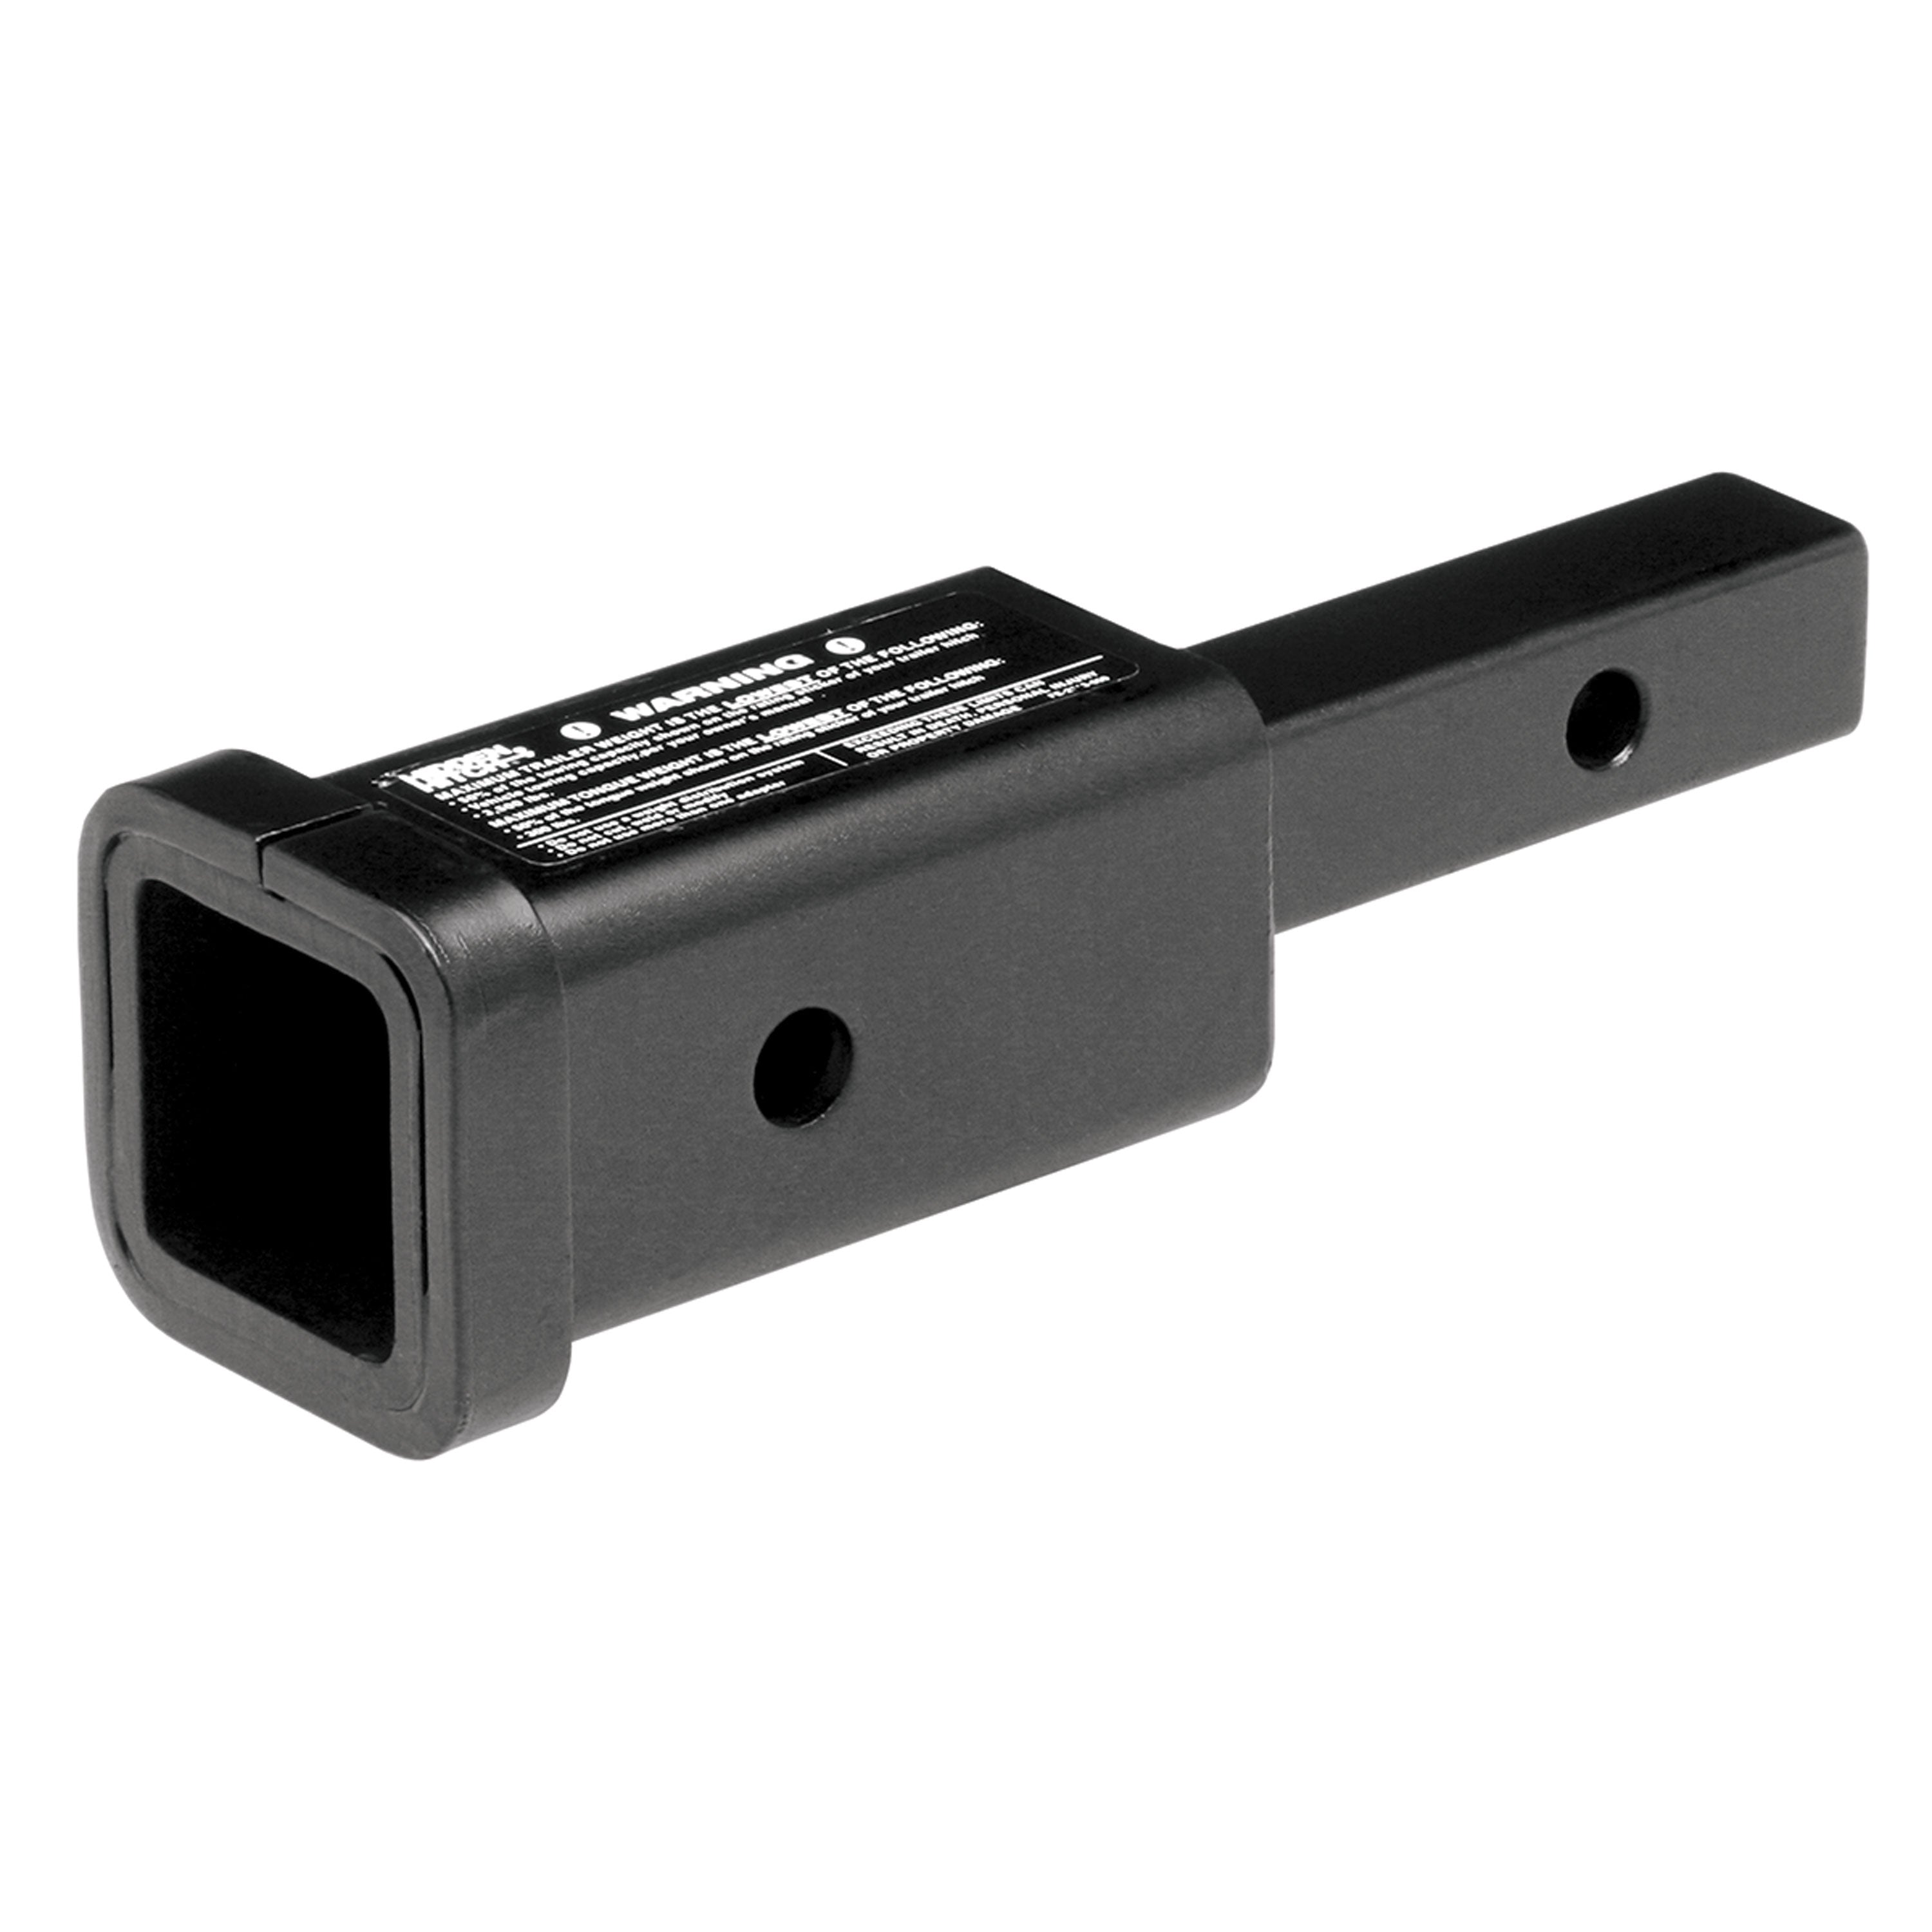 Reese 80303 Class II 1-1/4" to 2" Receiver Adapter - 6" Length, 3500 lbs.